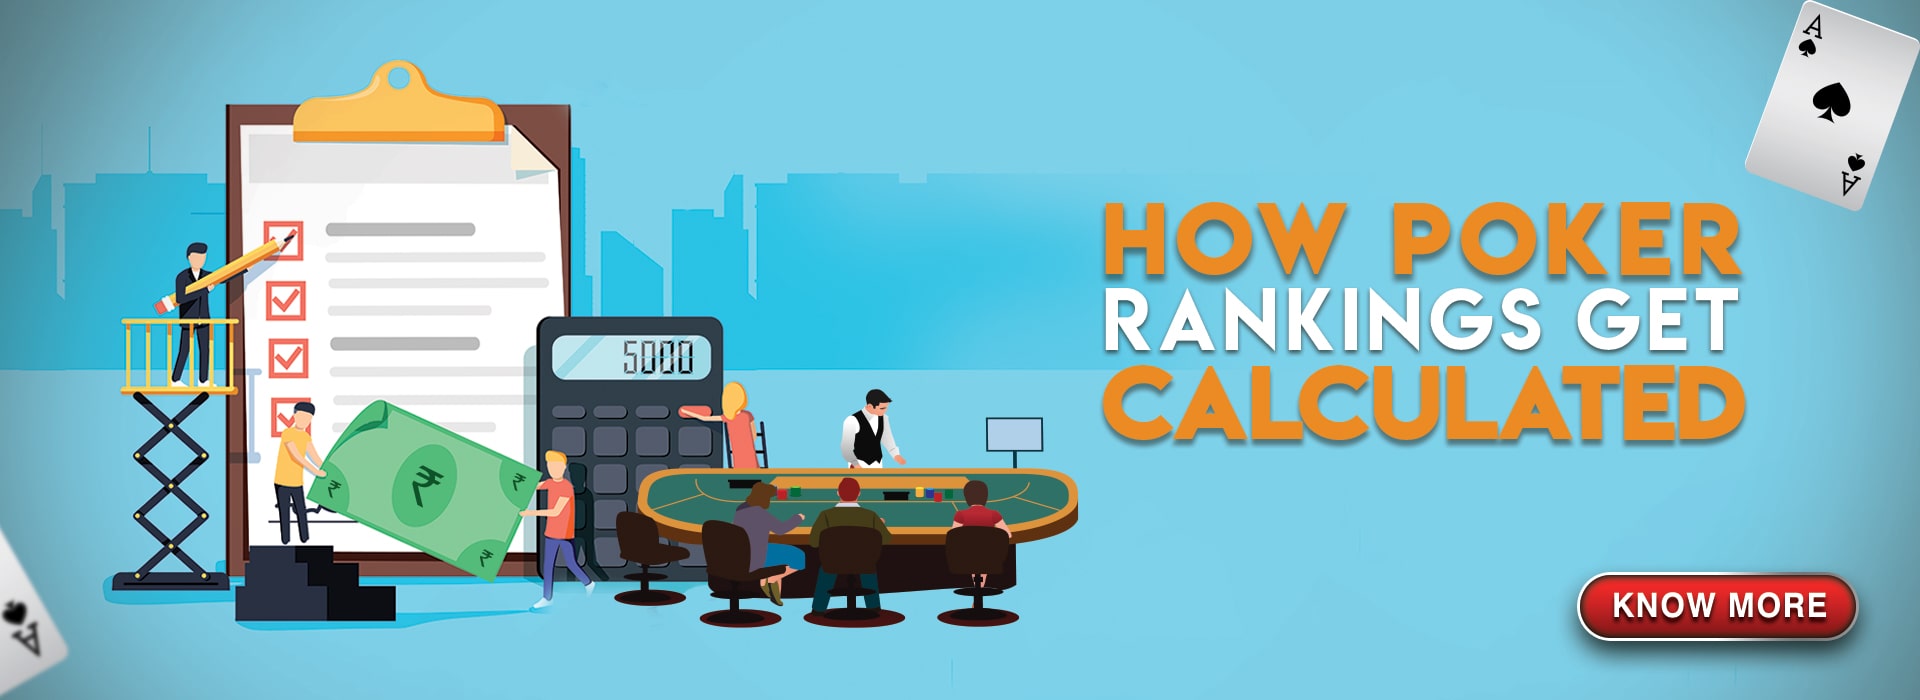 How poker rankings get Calculated